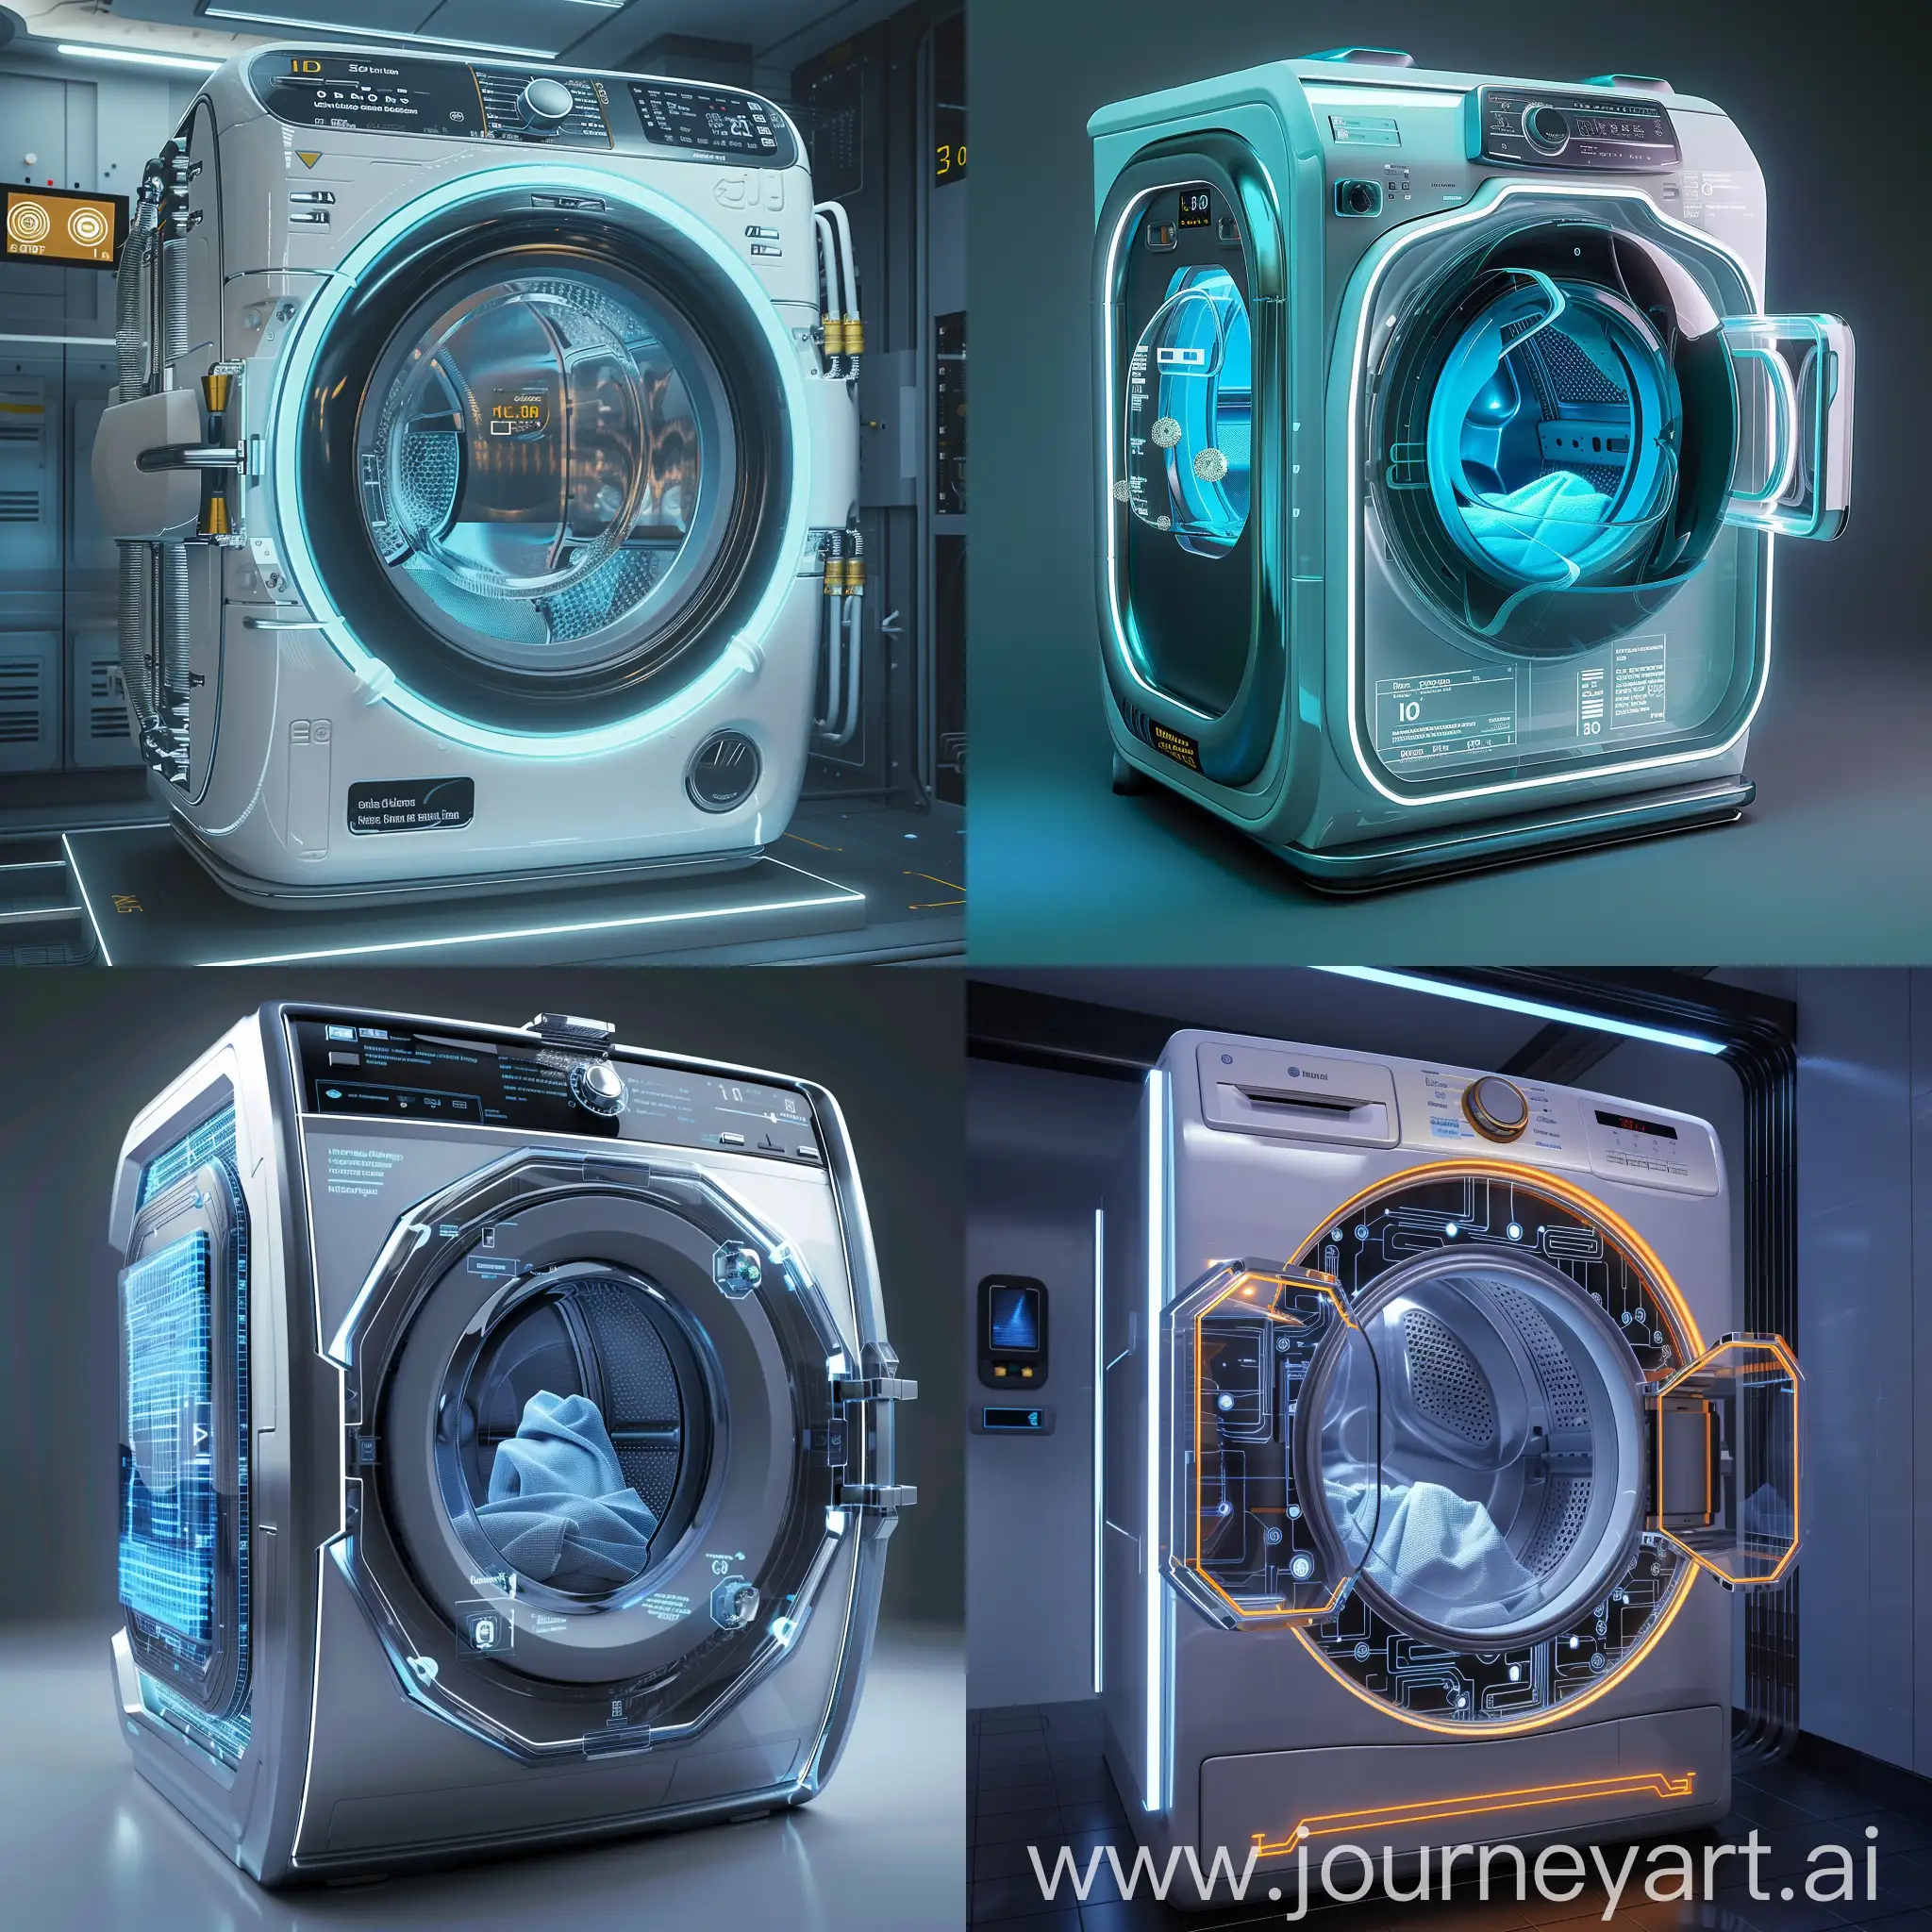 Futuristic-HighTech-Washing-Machine-with-3D-Water-Flow-Dynamics-and-Smart-Detergent-Dispensers